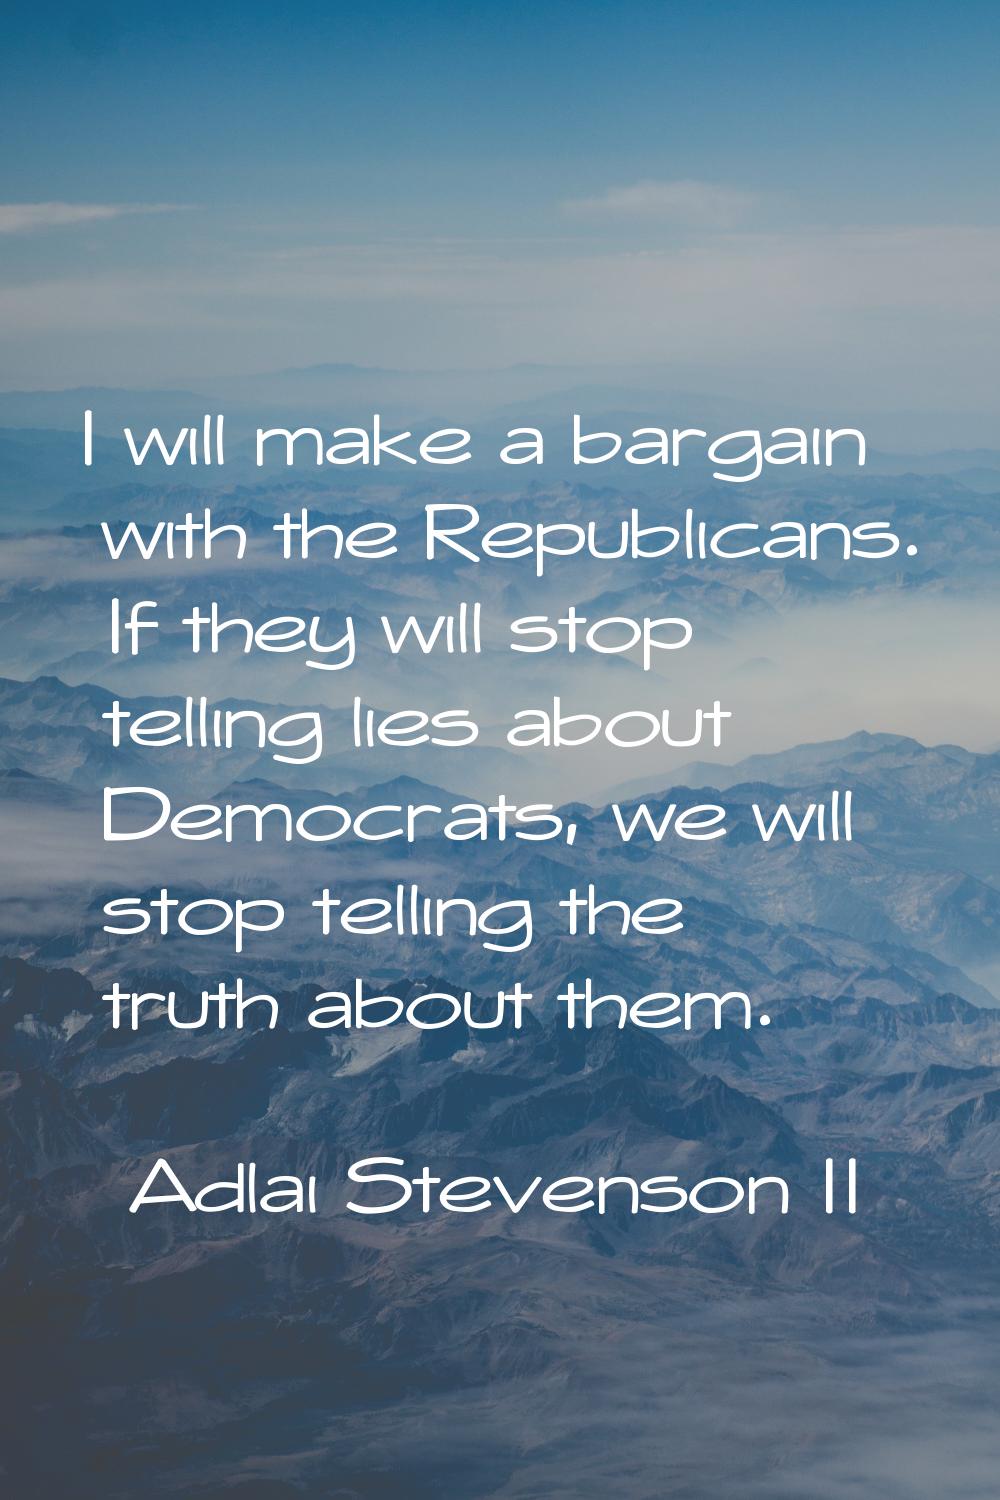 I will make a bargain with the Republicans. If they will stop telling lies about Democrats, we will